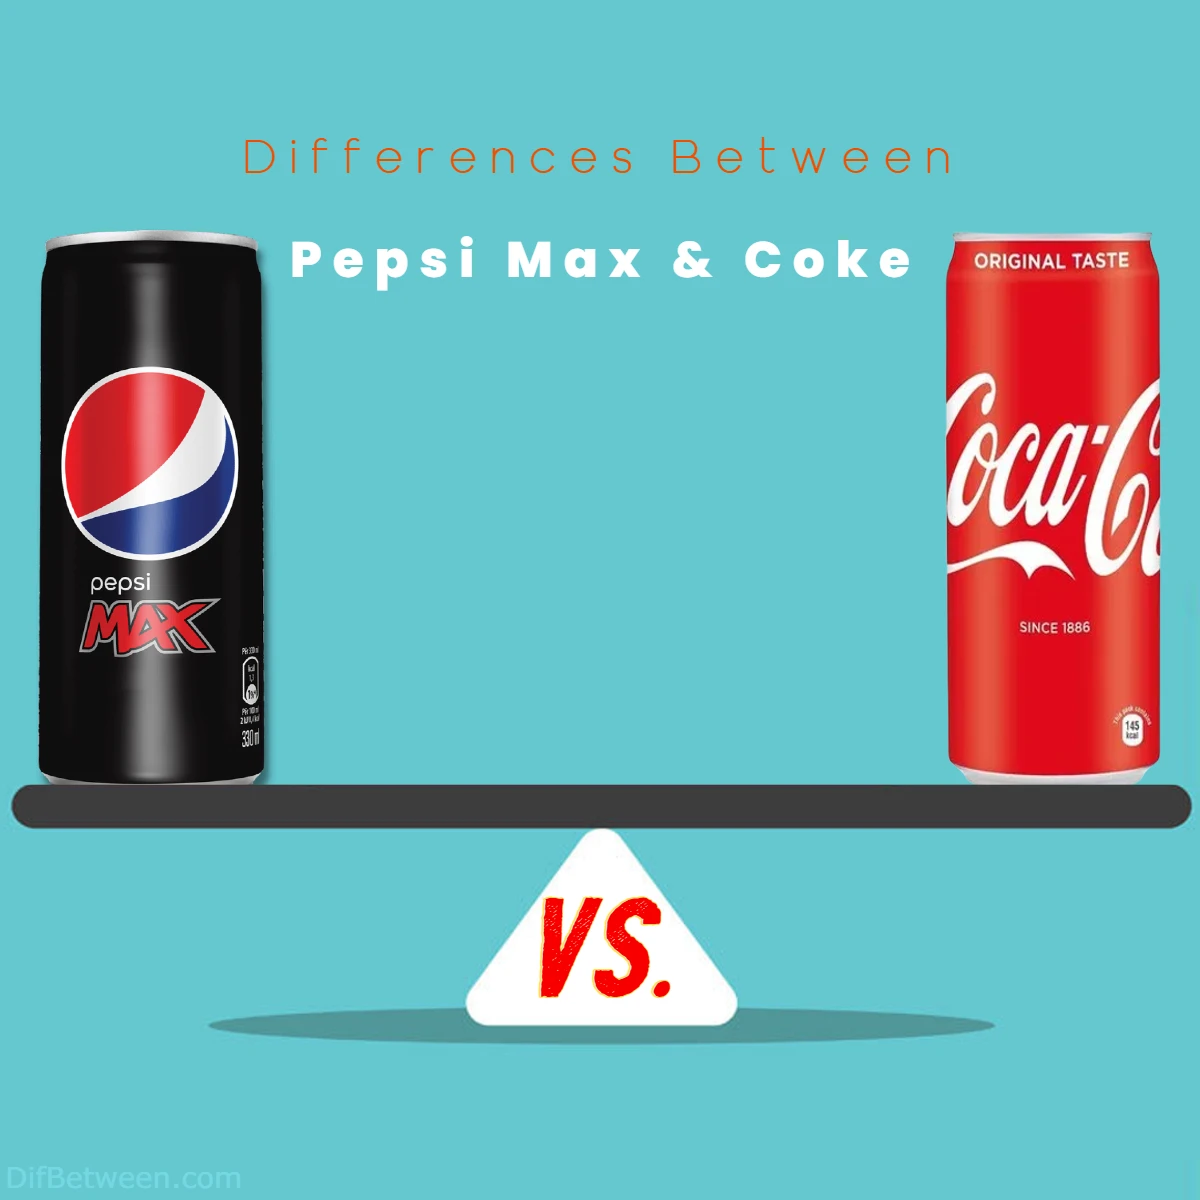 Difference Between Coke and Pepsi Max